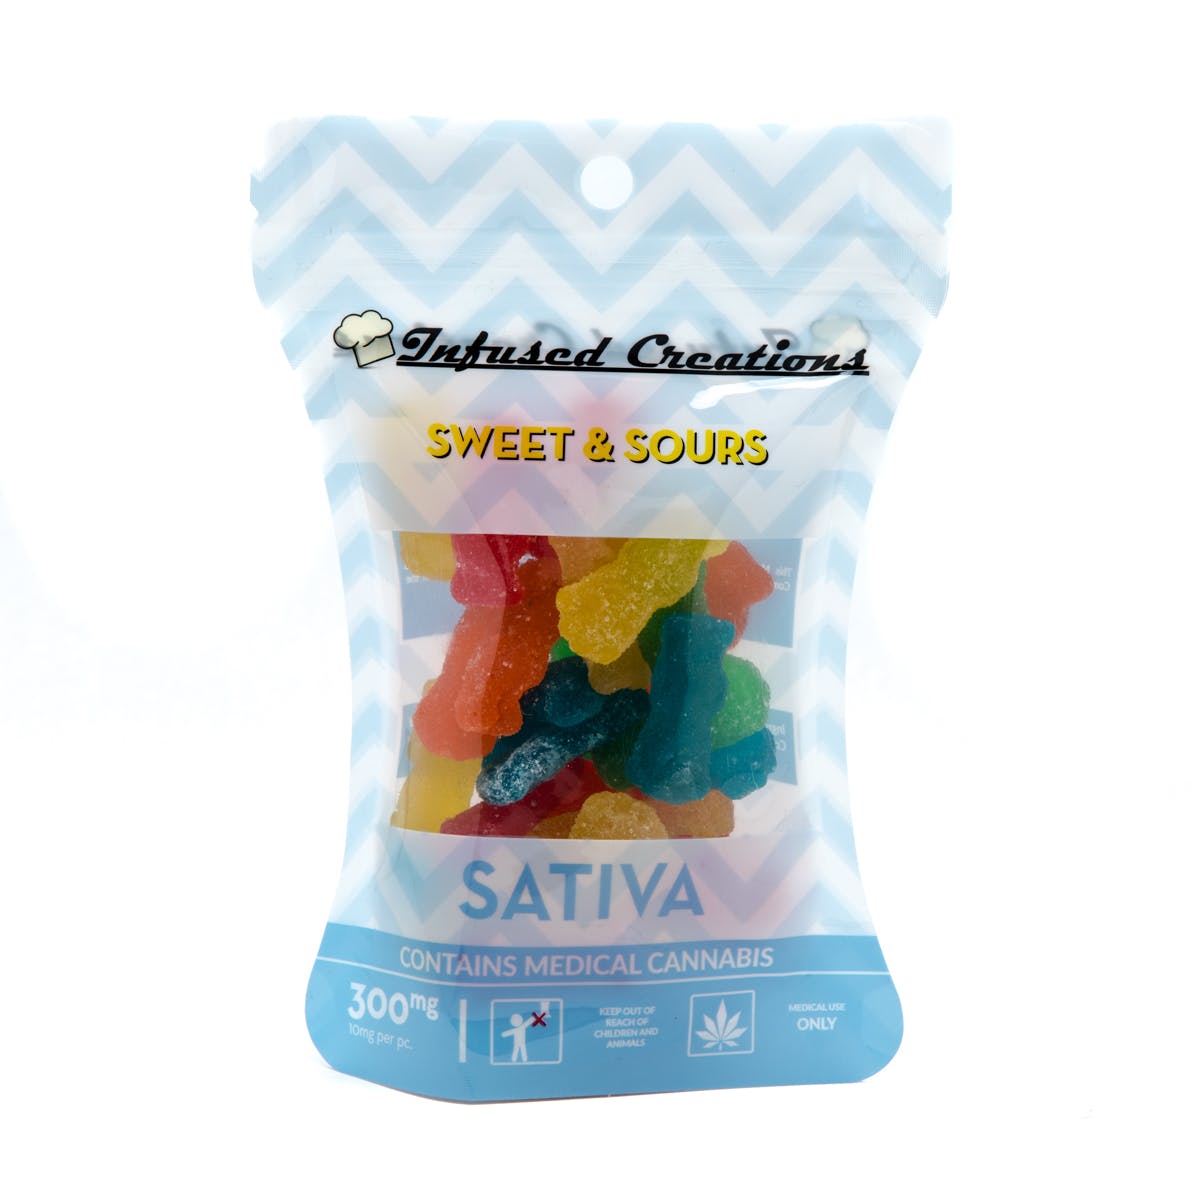 Sweet & Sours Sativa, 300mg